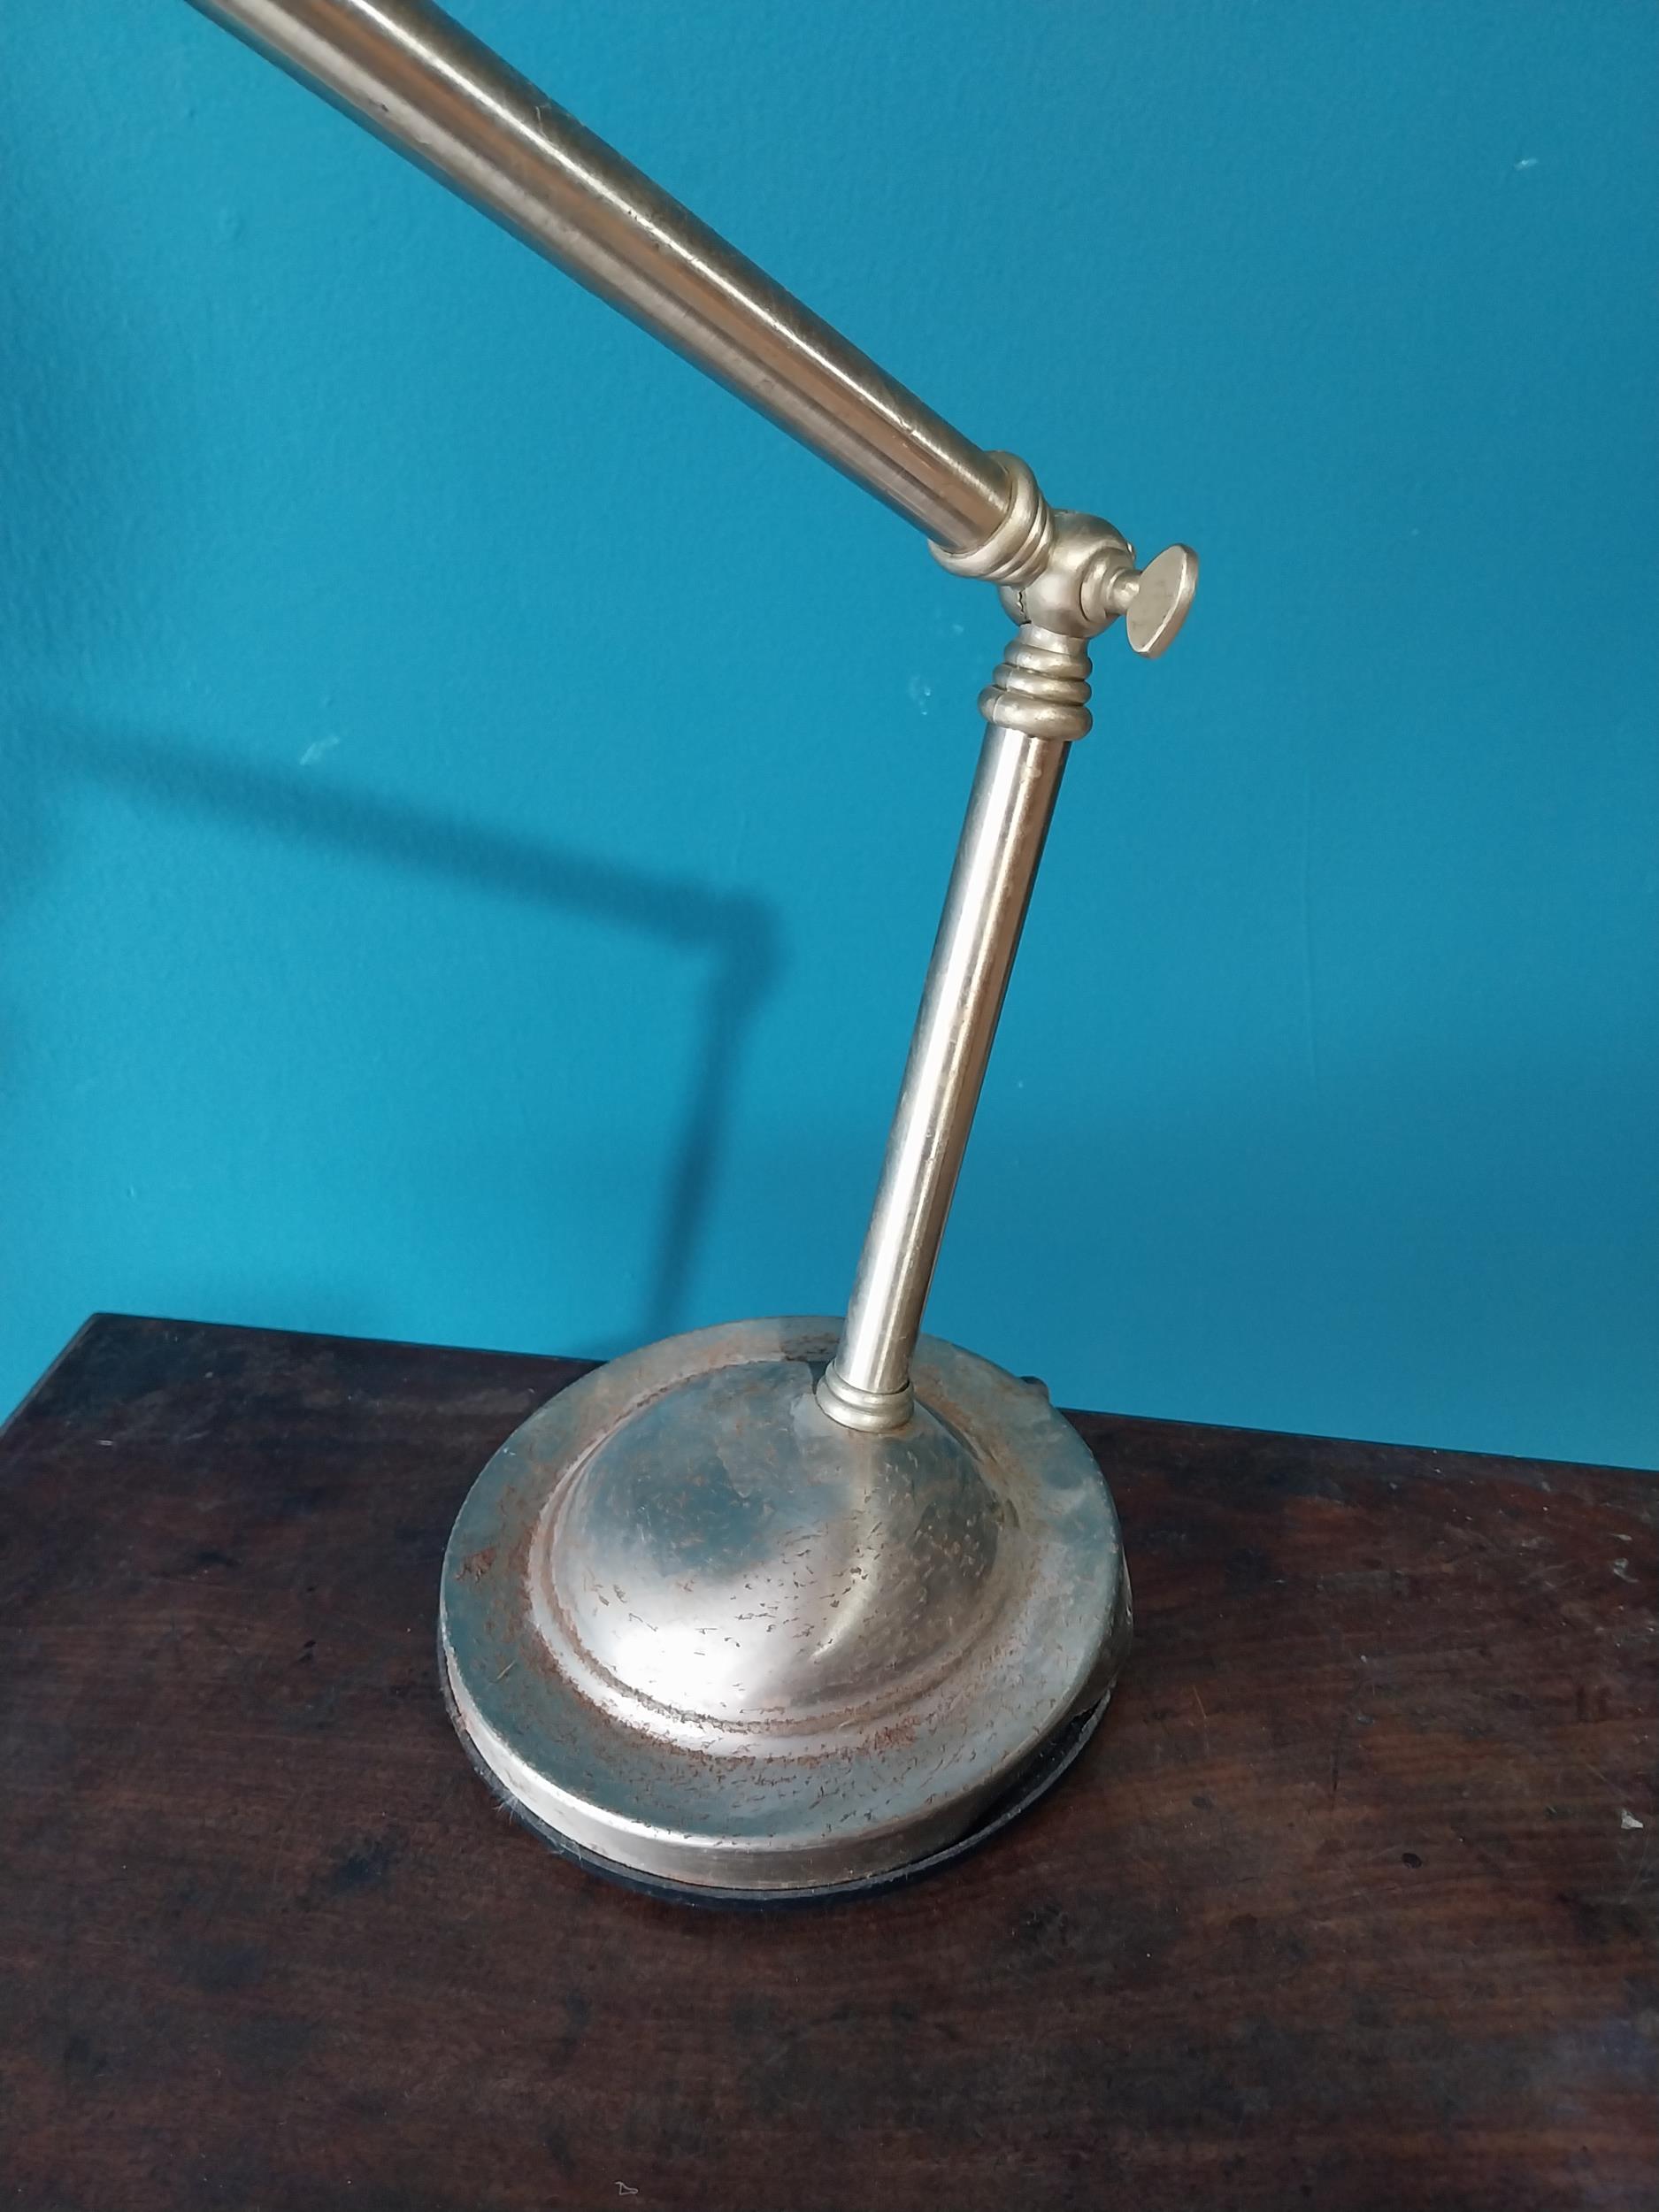 Polished metal retro industrial angle poised lamp {44cm H x 44cm W x 18cm D} - Image 2 of 3